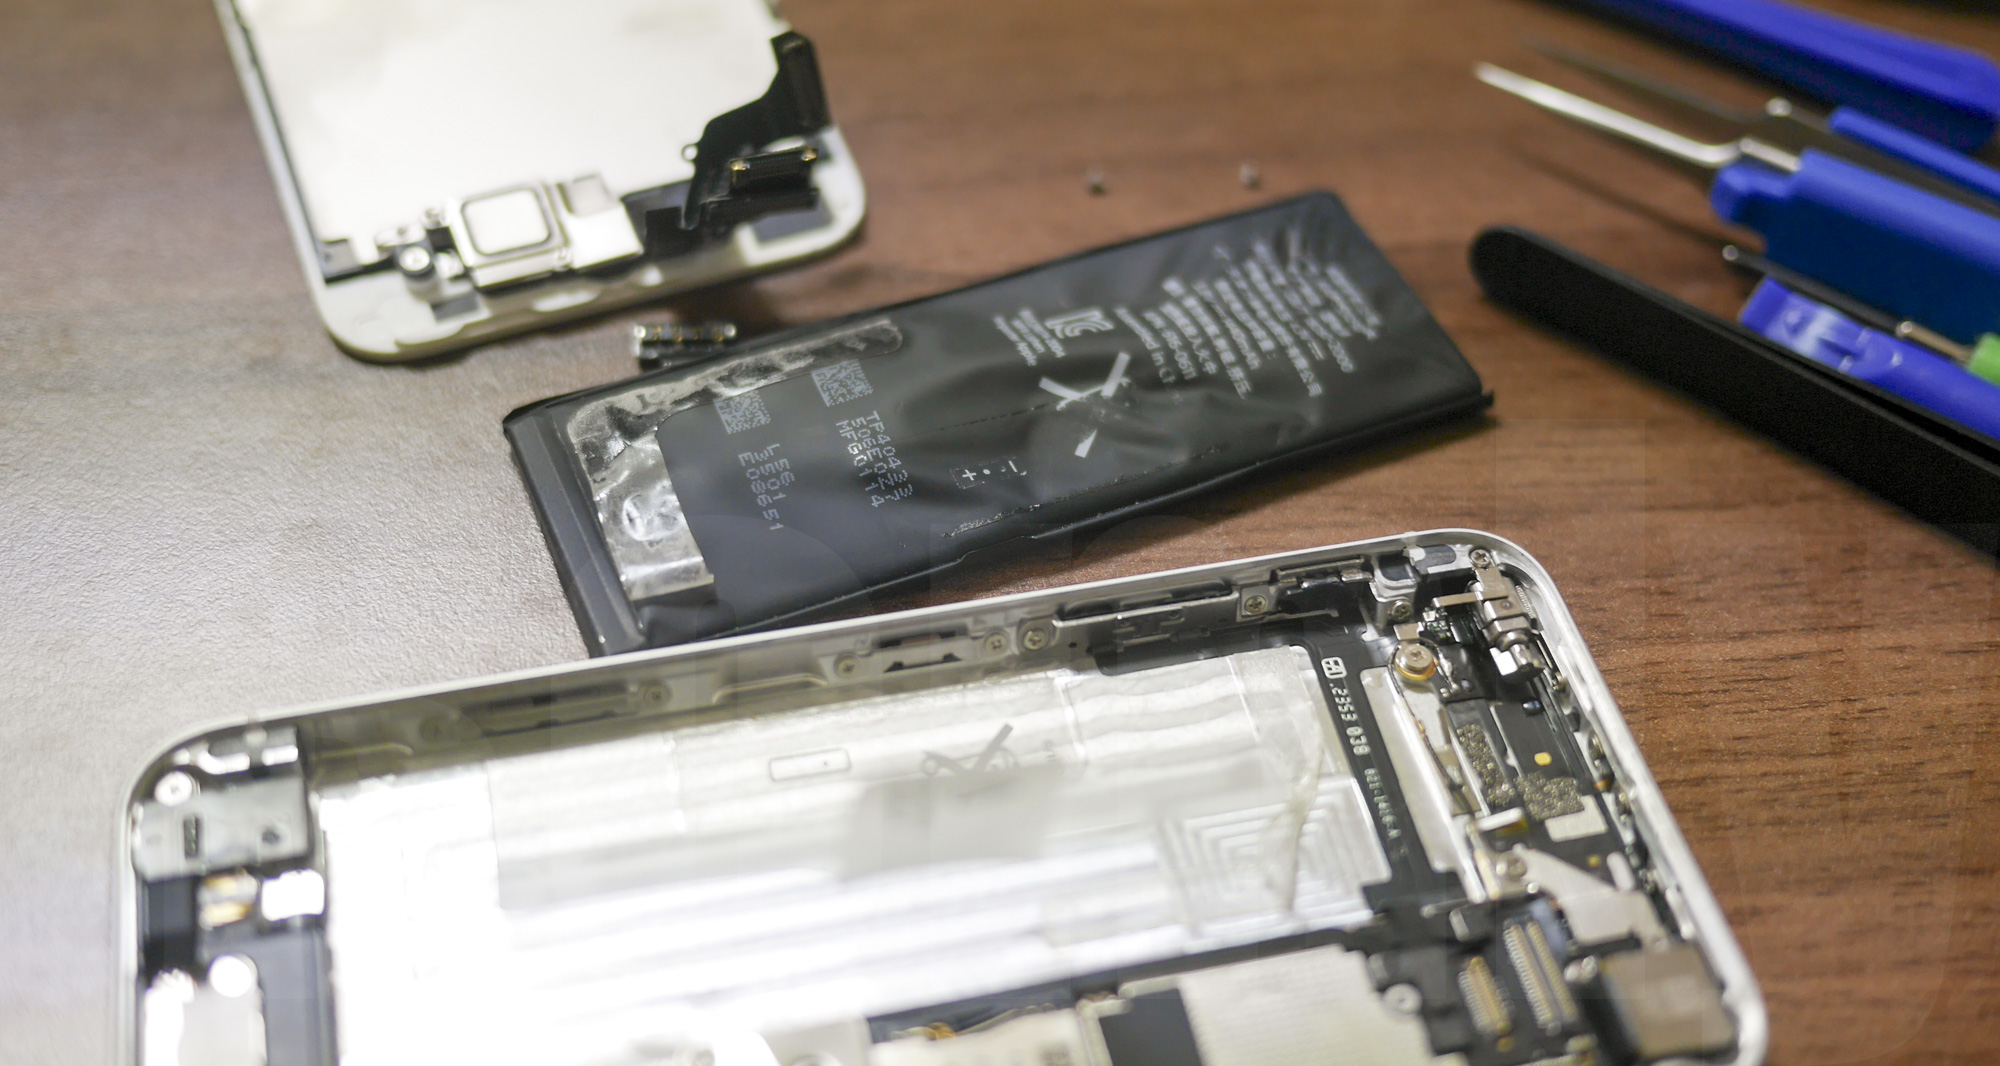 iPhone 5 Battery replacement: now battery is removed!!